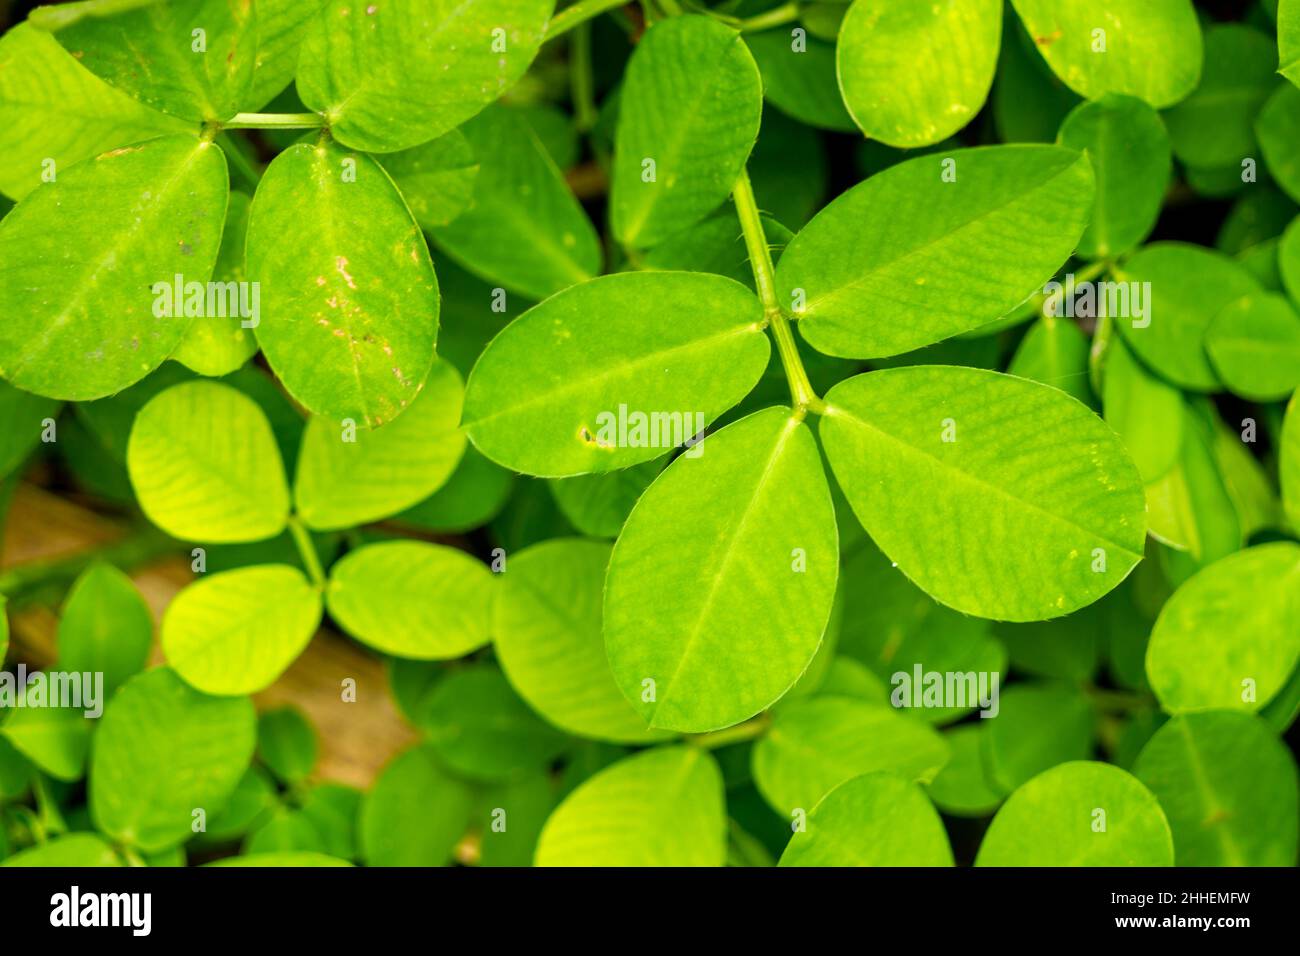 Spread of grass leaves with a type of Pinto peanut (Arachis pintoi Krap. and Greg) is a herbaceous, perennial legume, exclusively native to Brazil Stock Photo